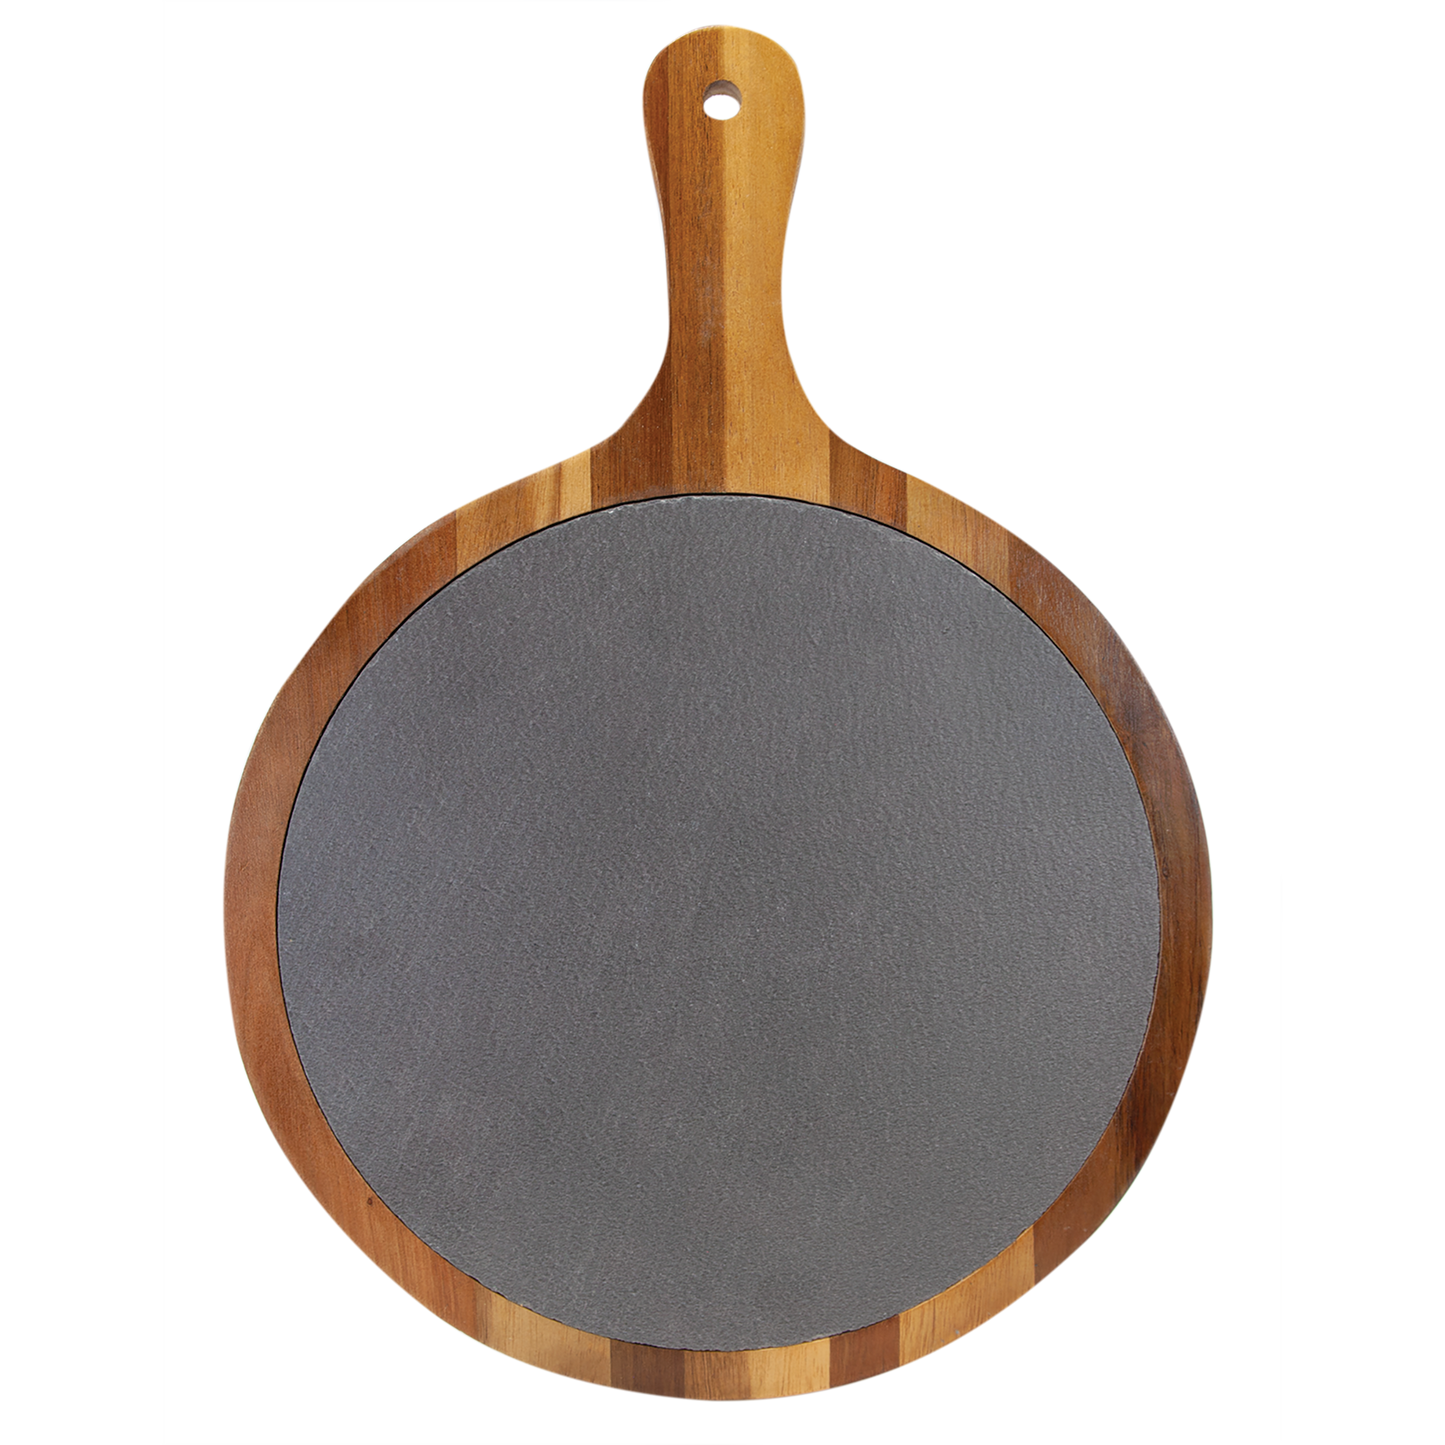 Custom Engraved 10 1/2" x 14 1/2" Round Acacia Wood/Slate Serving Board with Handle